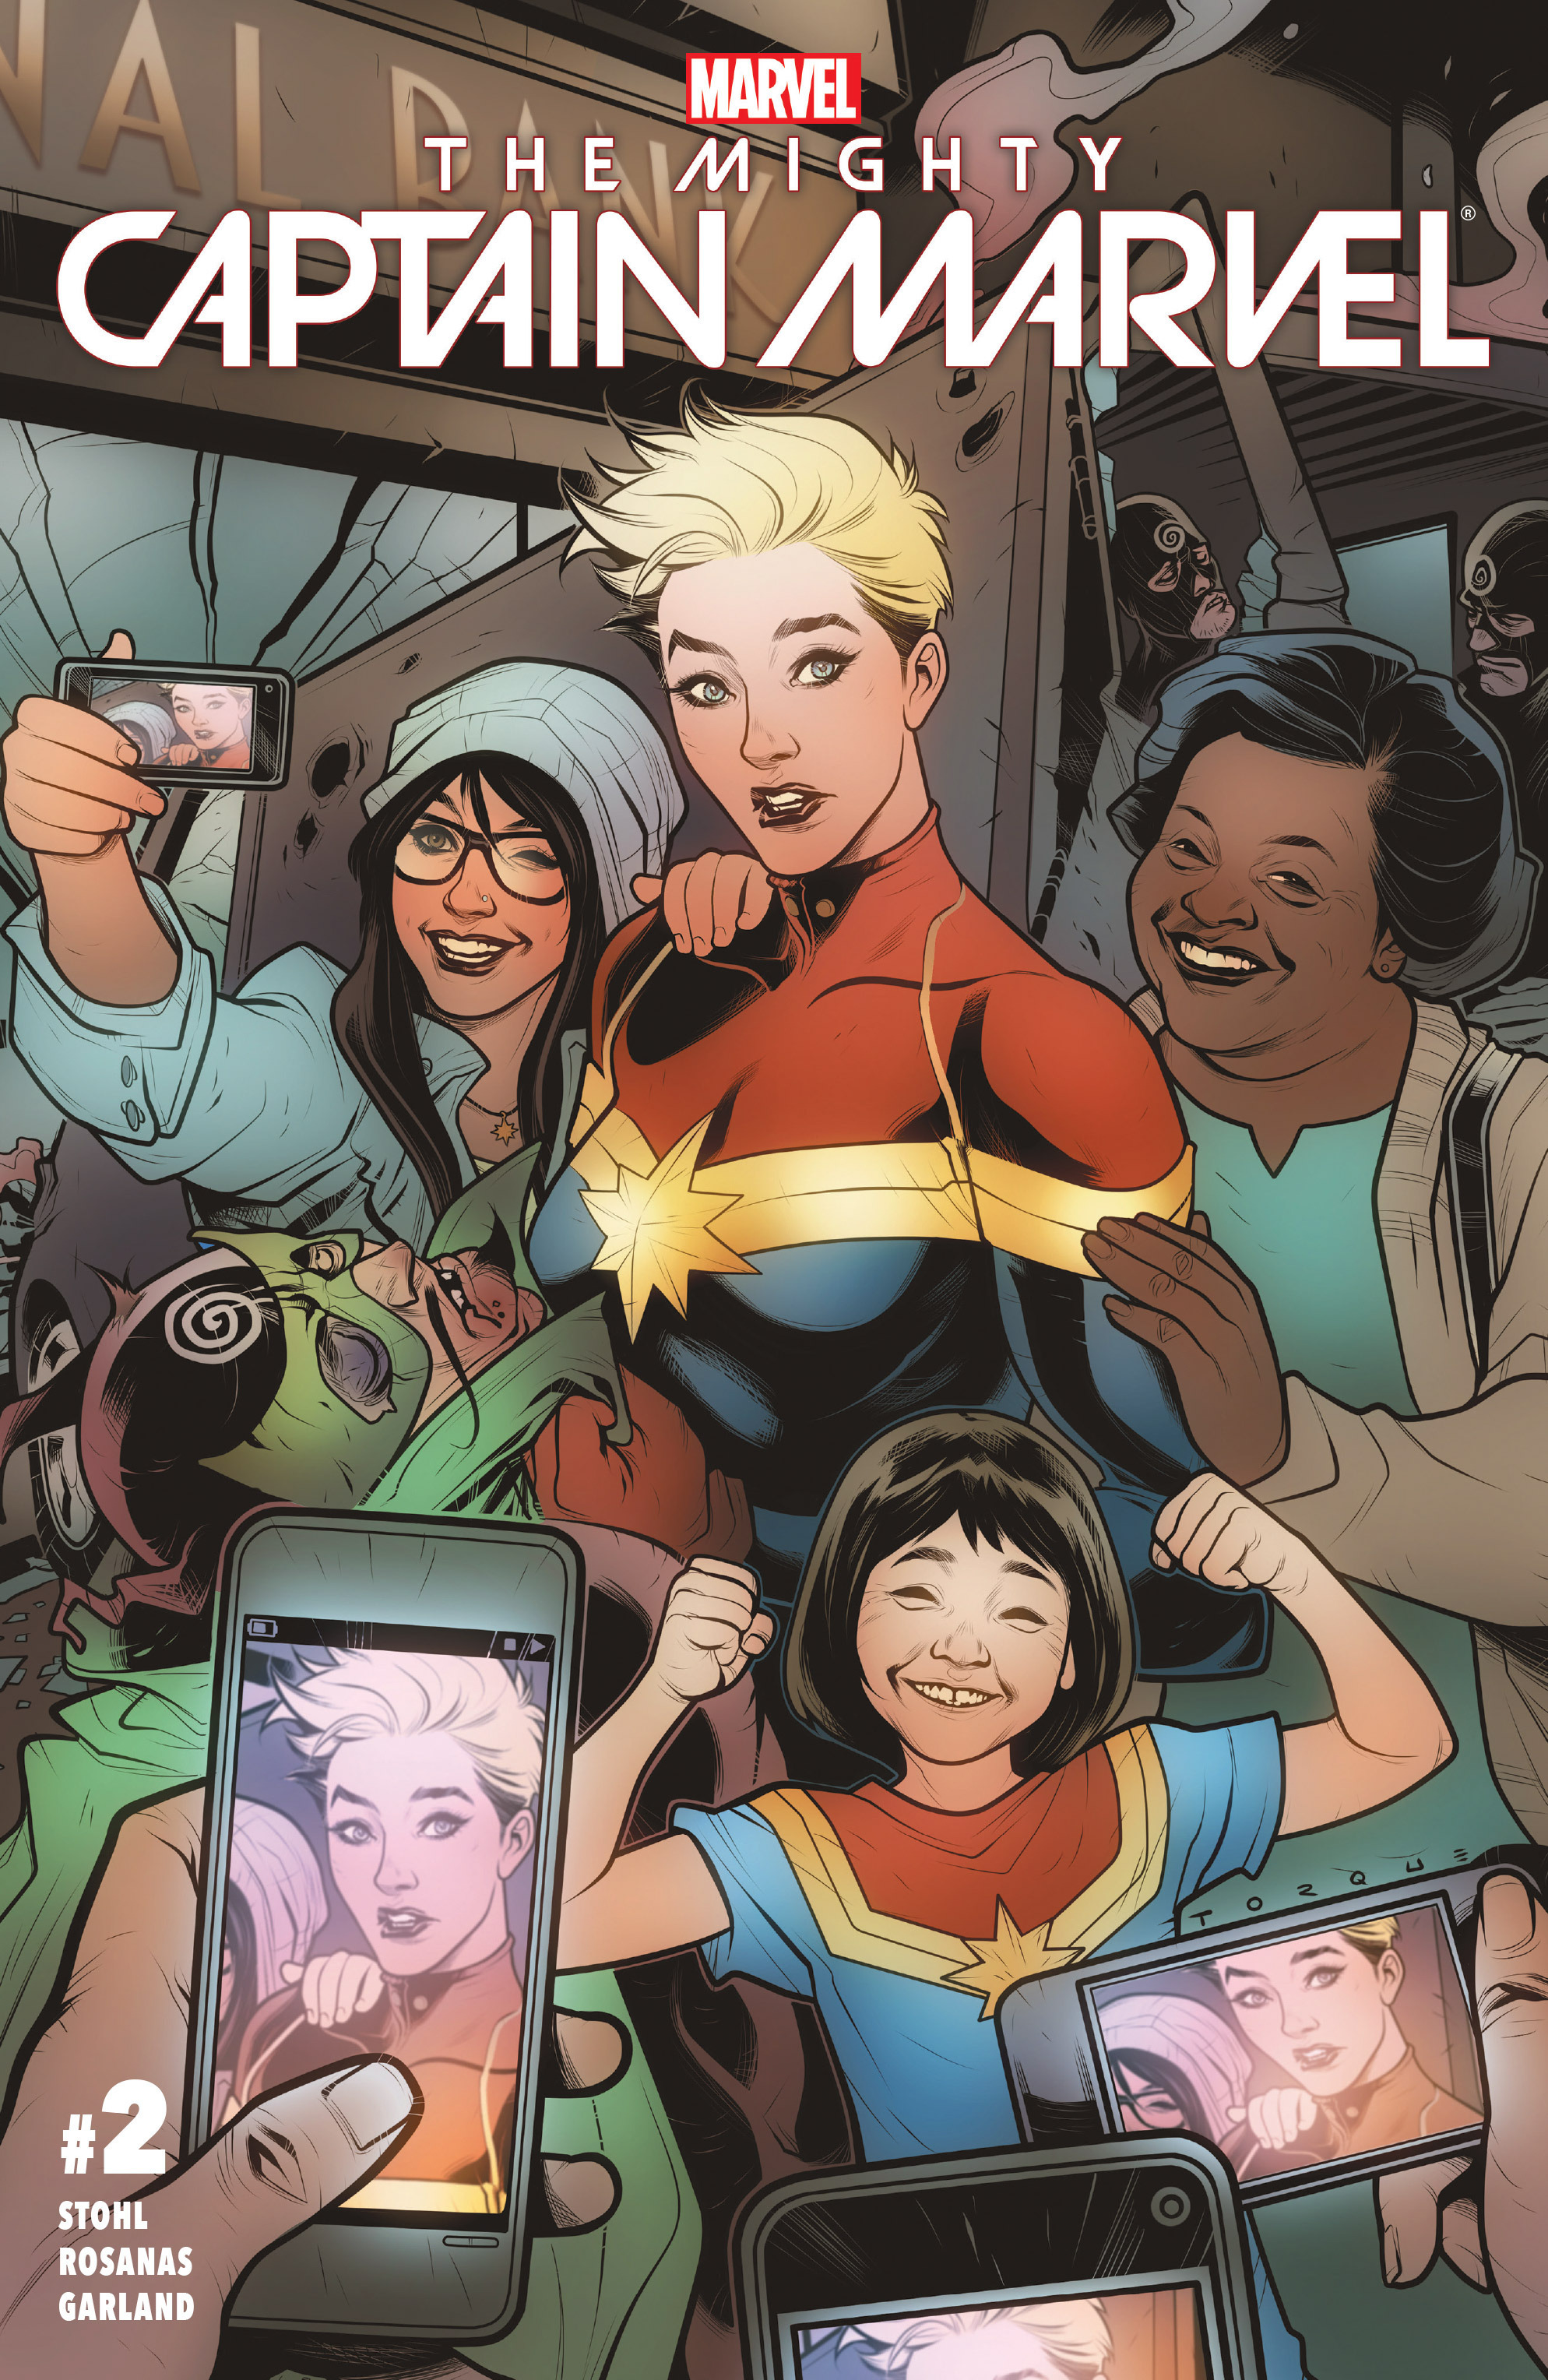 Read online The Mighty Captain Marvel comic -  Issue #2 - 1